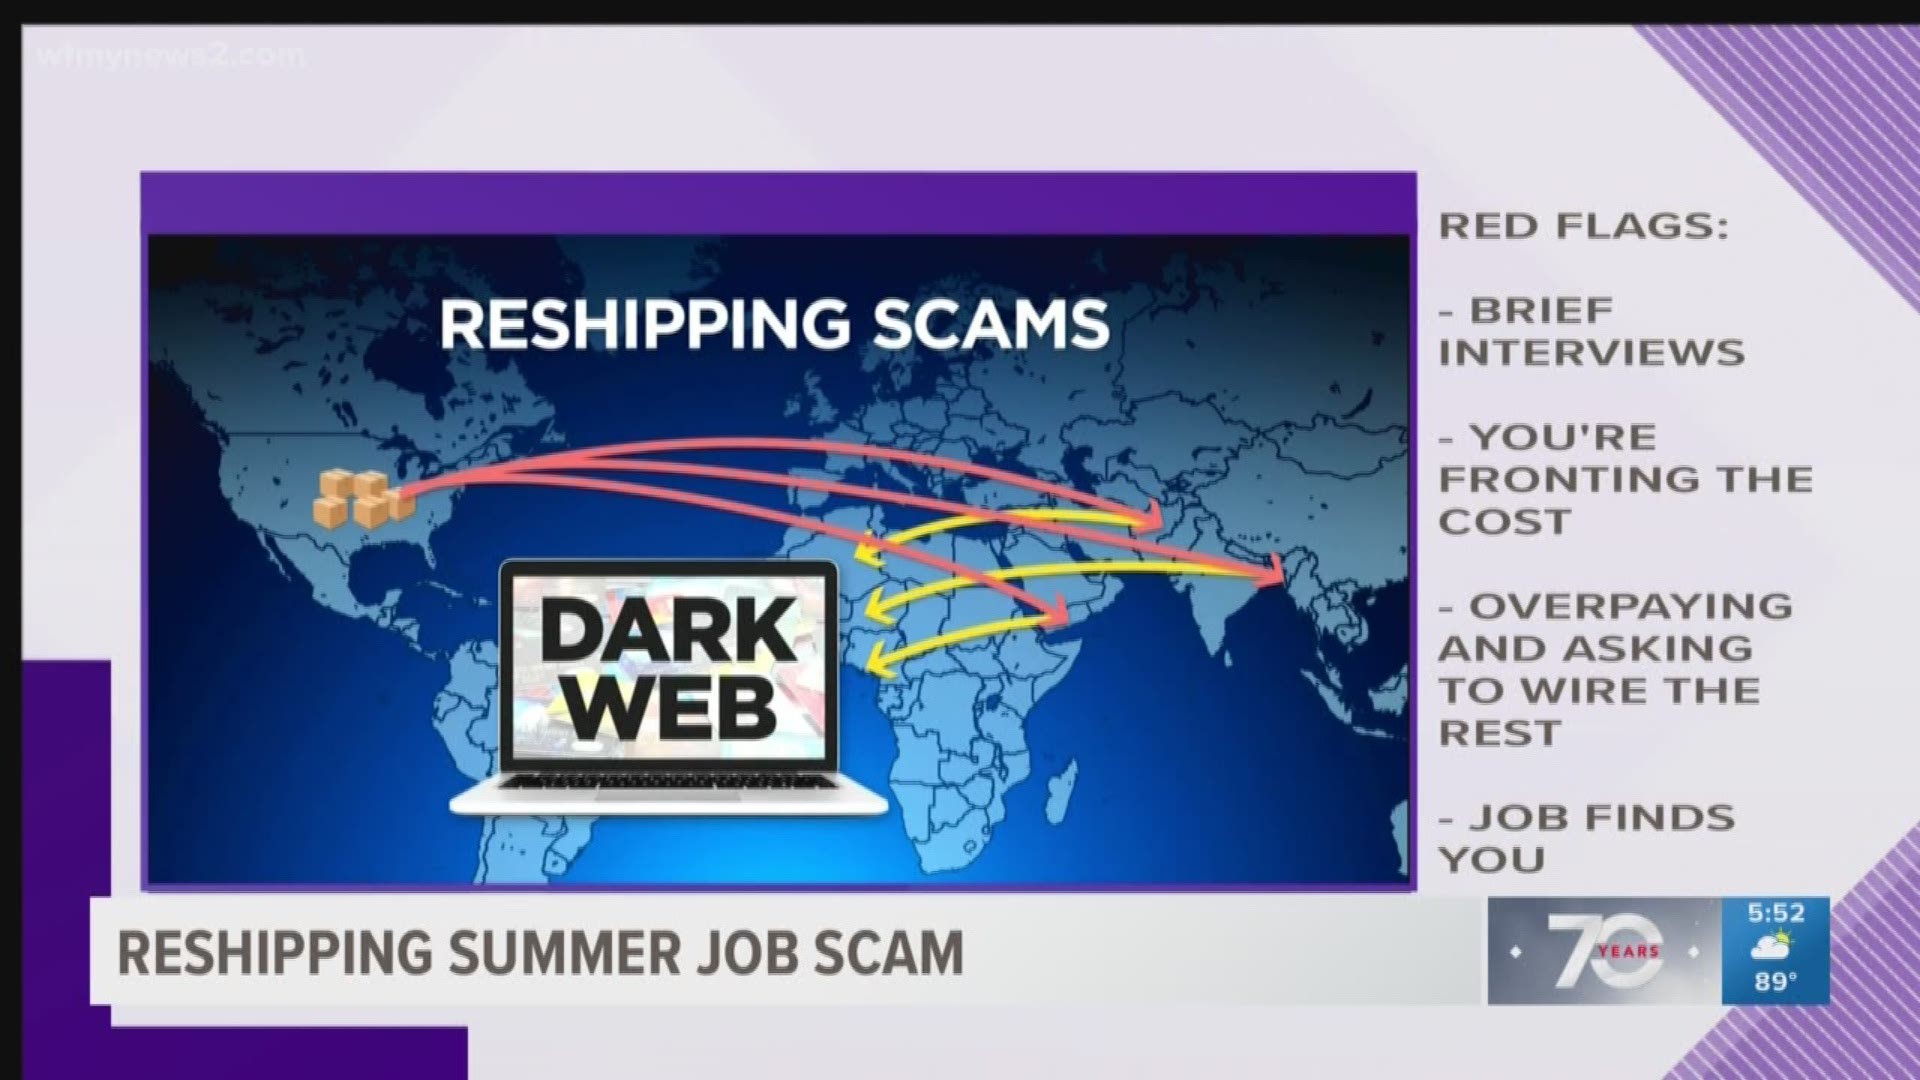 People looking for a way to make money may think being paid to re-ship things sounds legit, but it can be a scam.